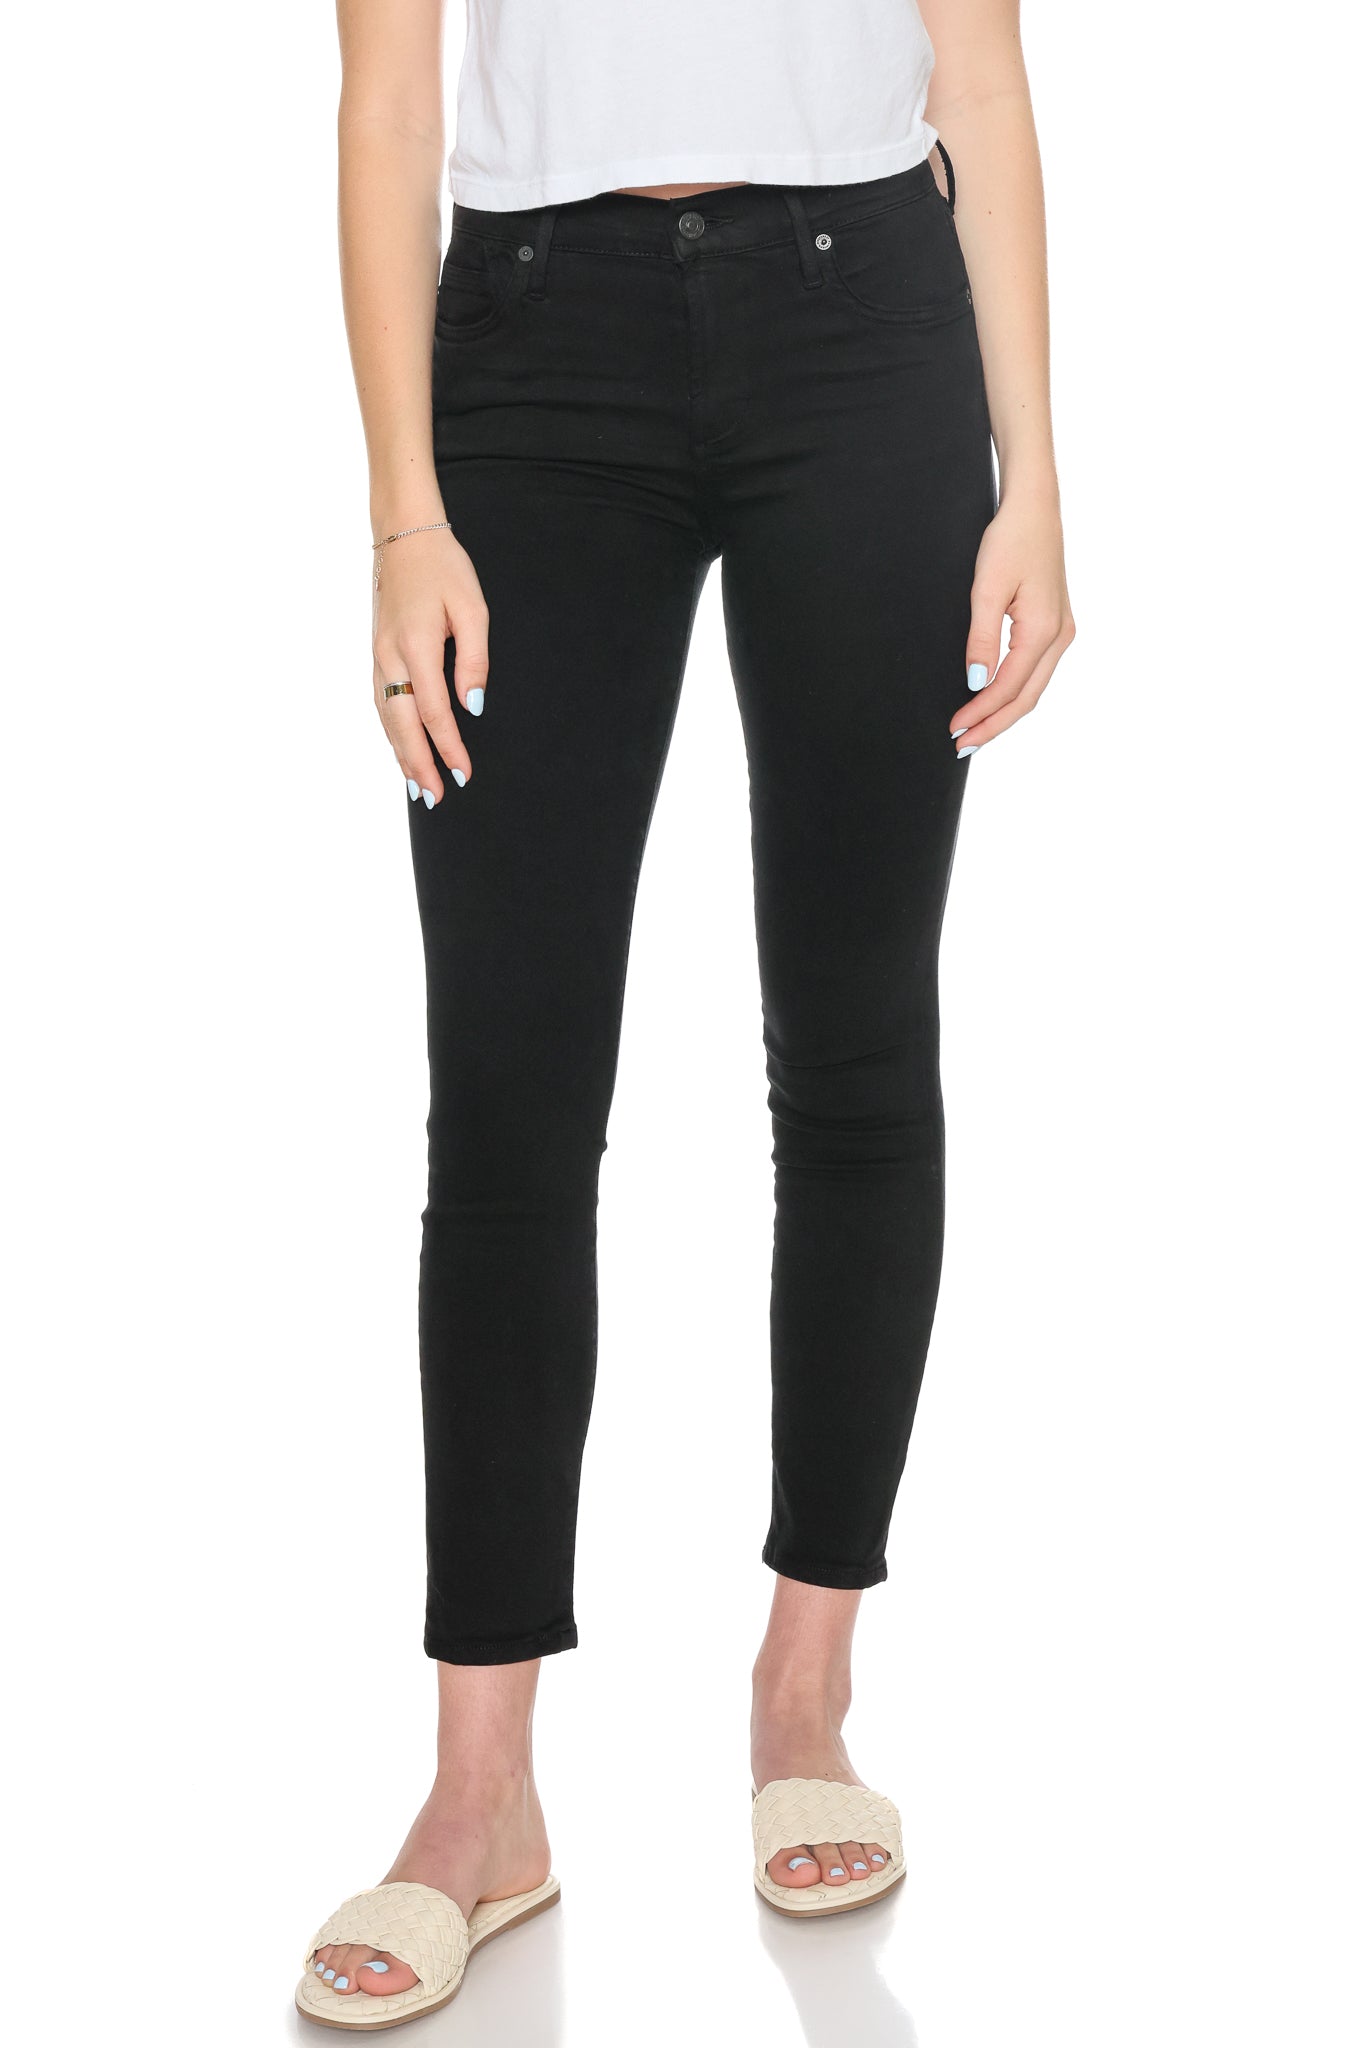 Rocket Ankle Skinny Jeans in Plush Black - CITIZENS OF HUMANITY